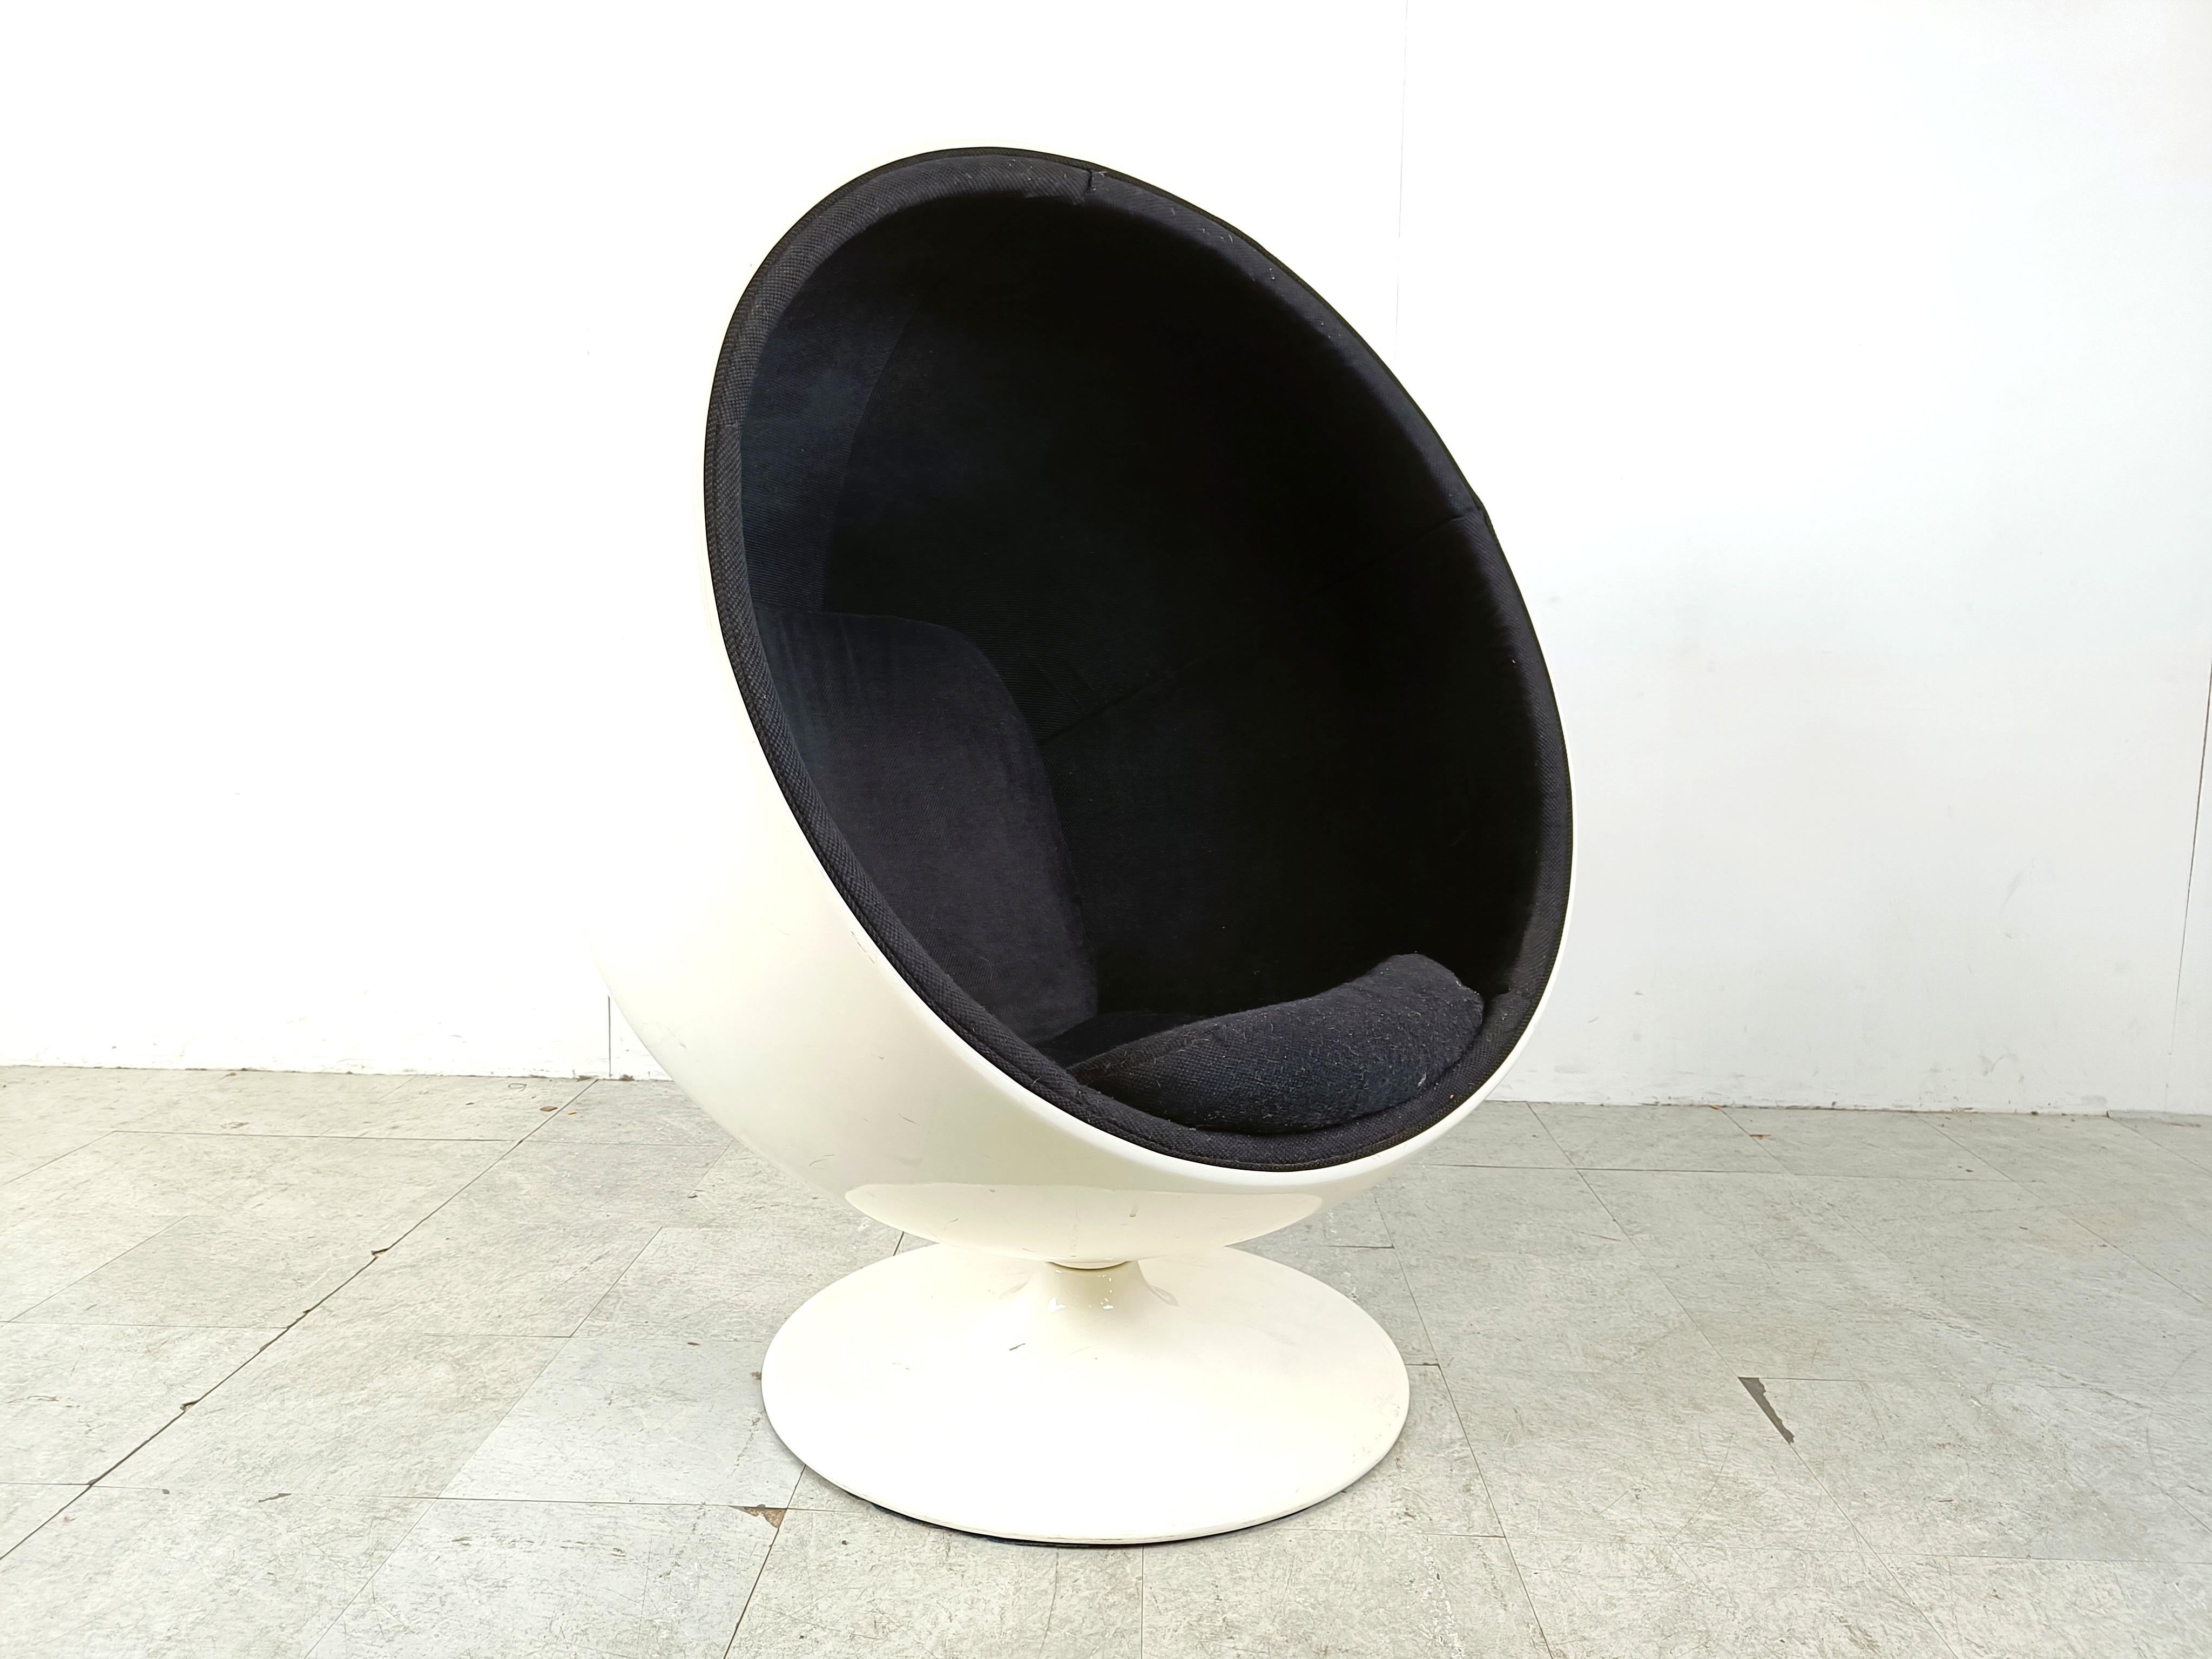 Vintage lounge swivel chair attributed to Eero Aarnio.

This is not an original or signed exampled and the design has been attributed to Eero Aarnio.

The Ball Chair was designed in 1963 and debuted at the Cologne Furniture Fair in 1966. The chair